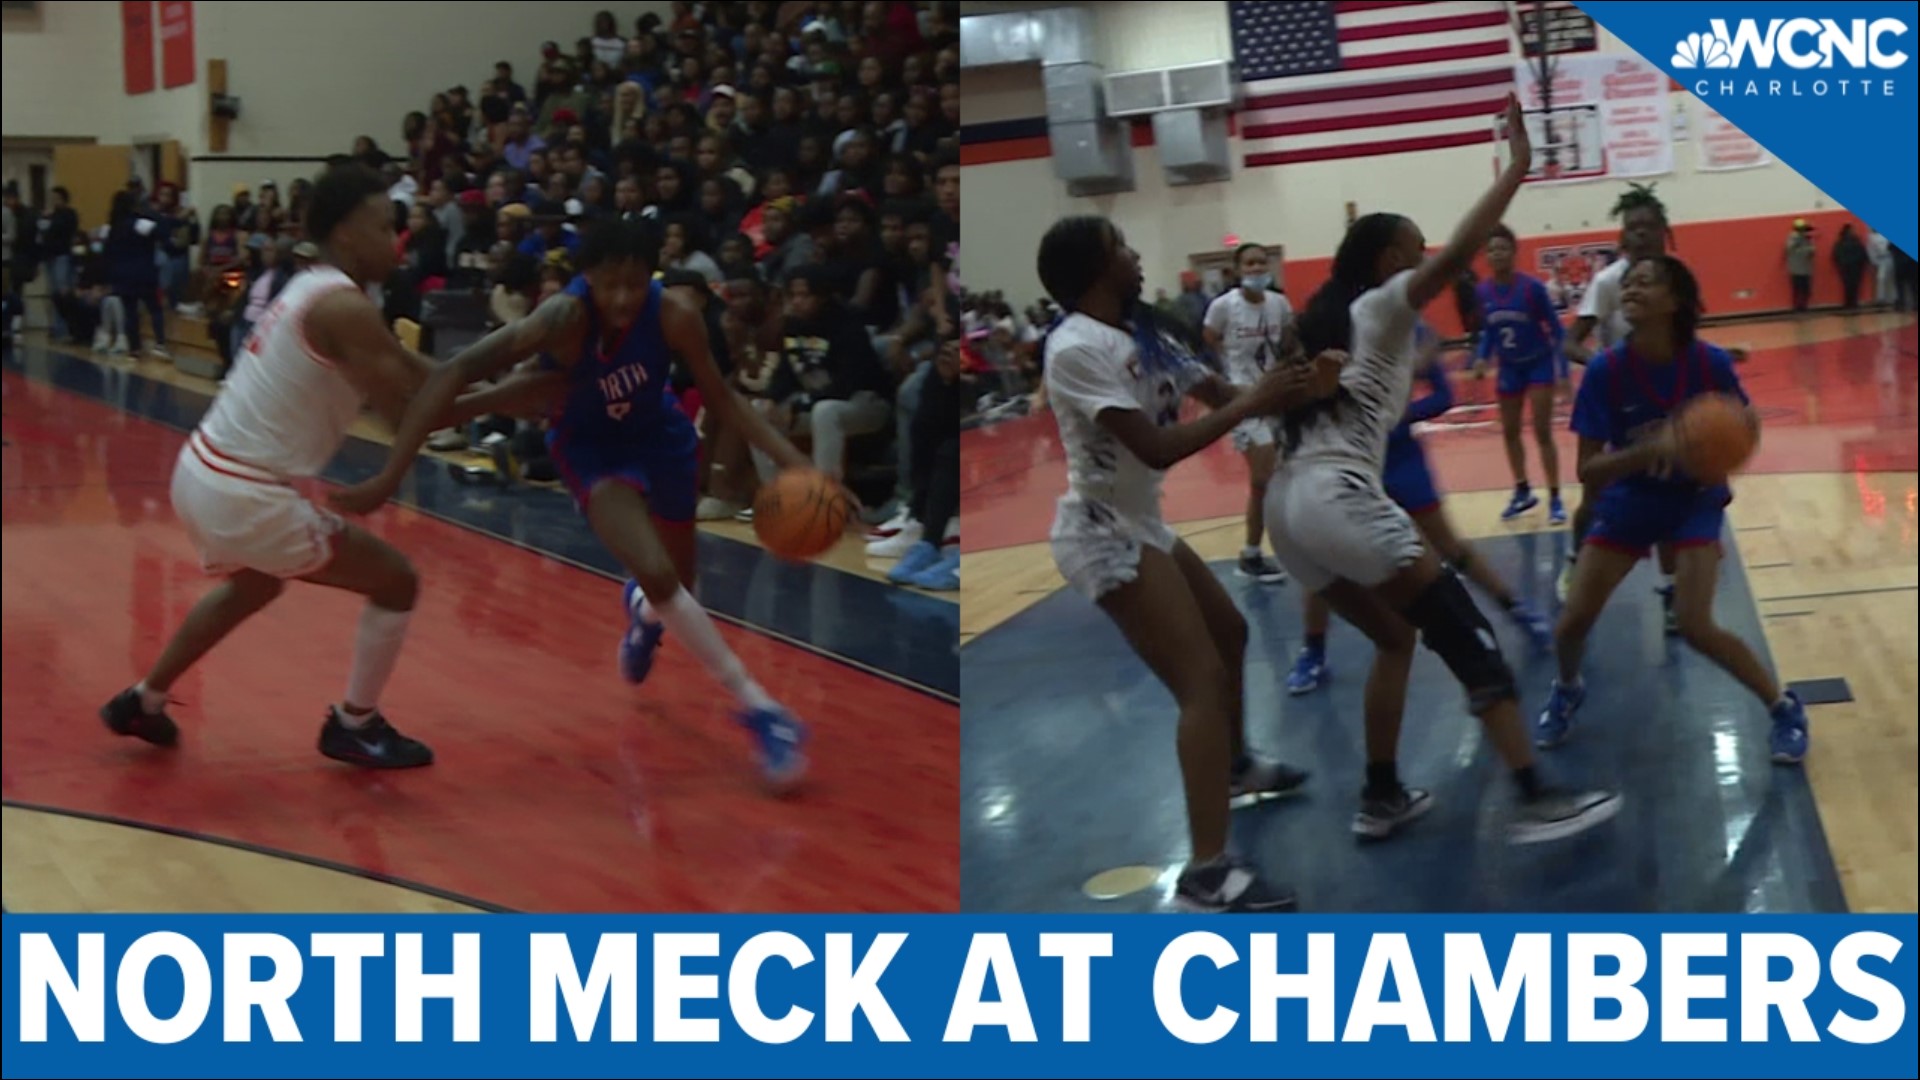 North Meck boys basketball won an instant classic 77-74 in overtime, and North Meck girls basketball won 59-57.